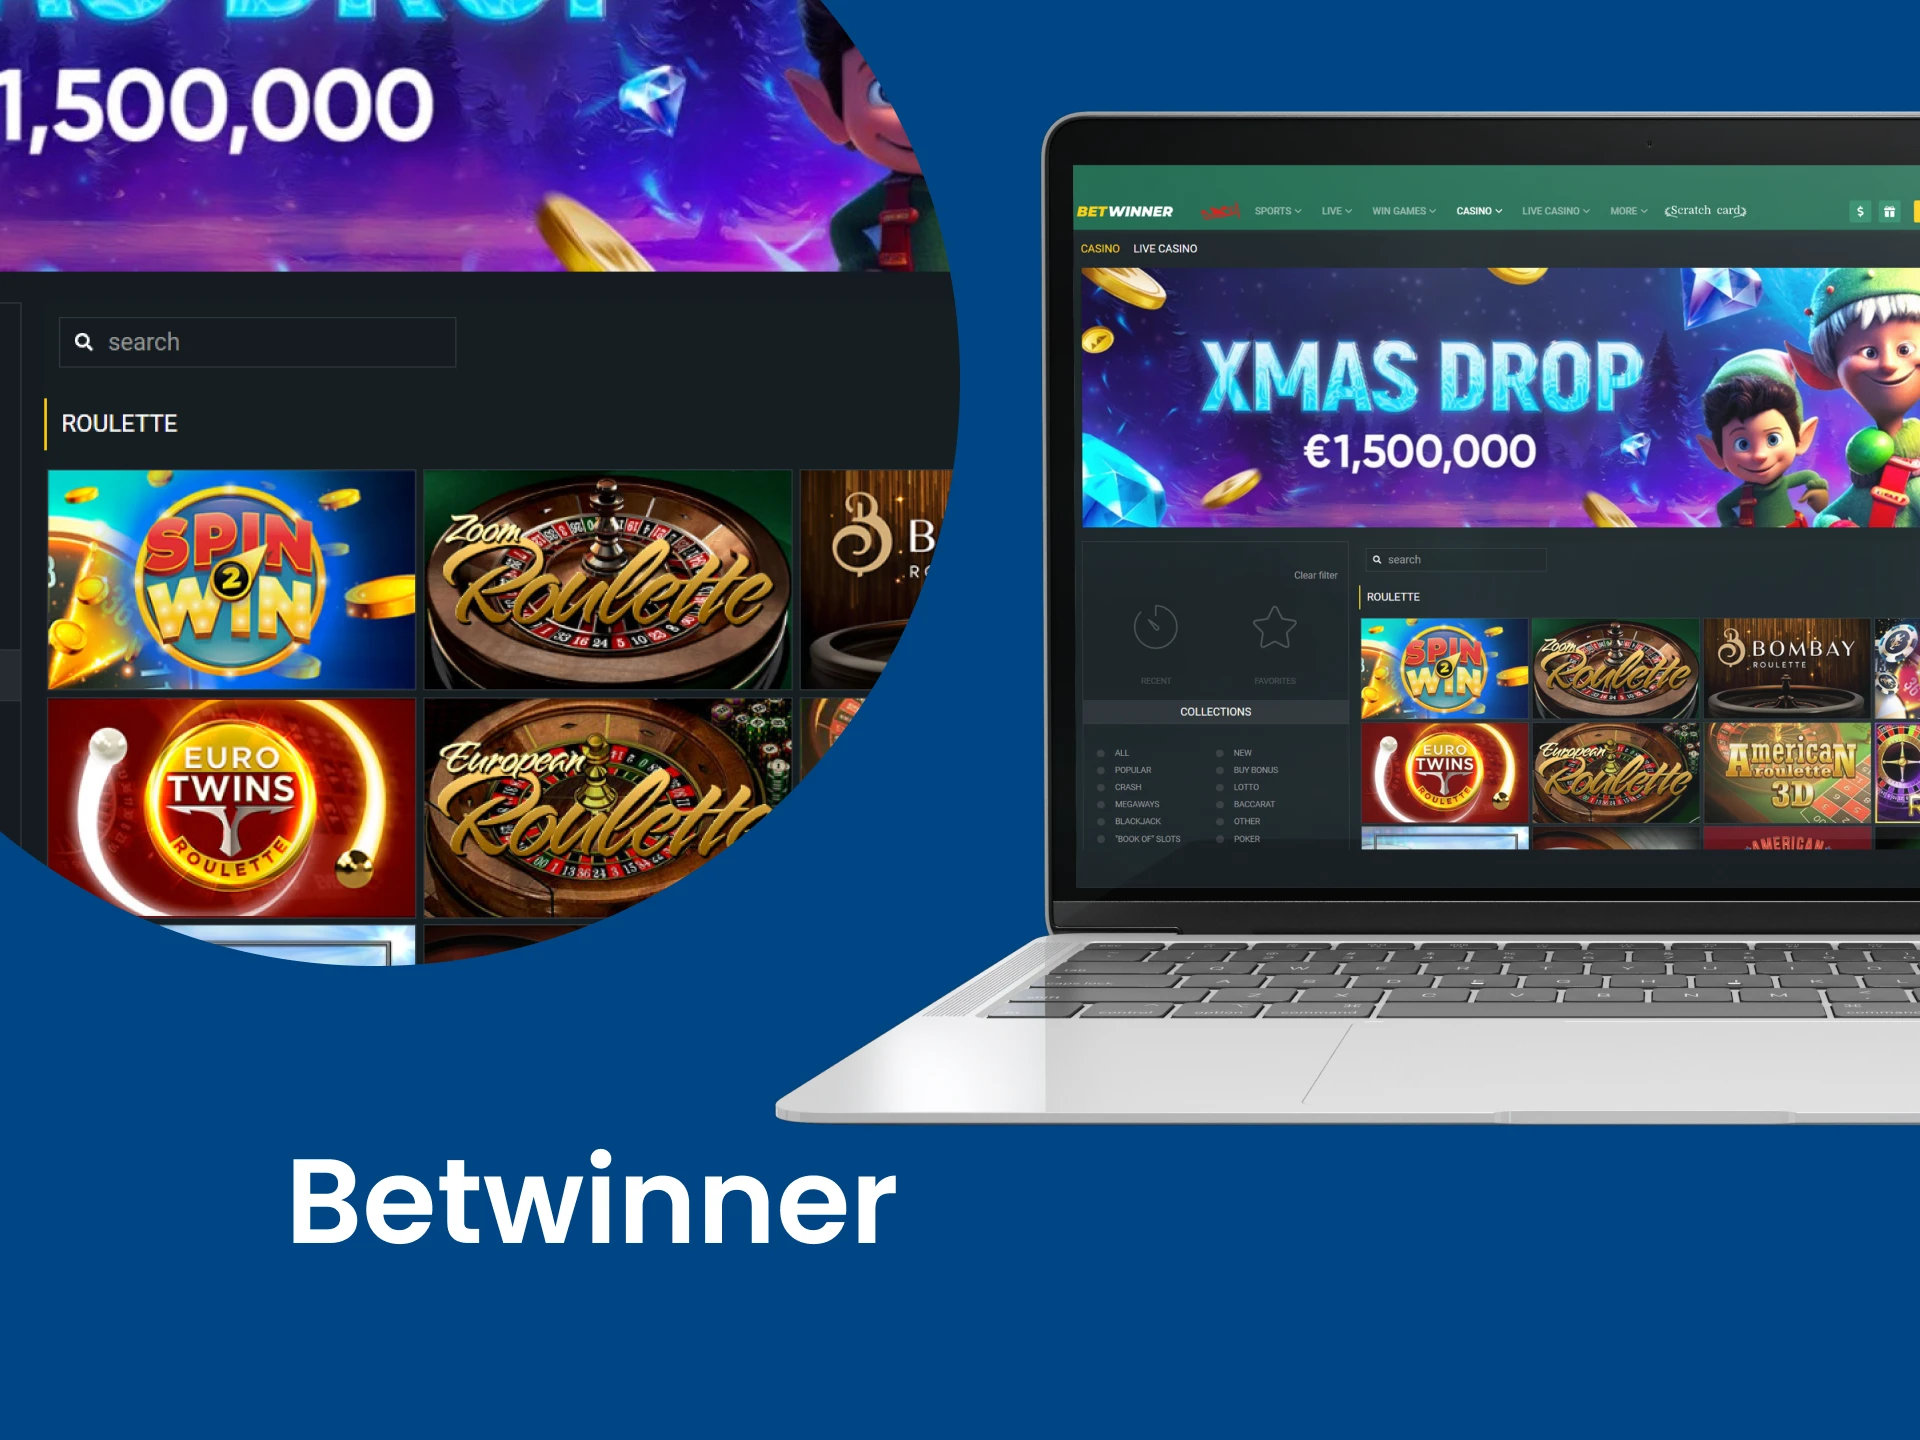 Betwinner is ideal for playing roulette.